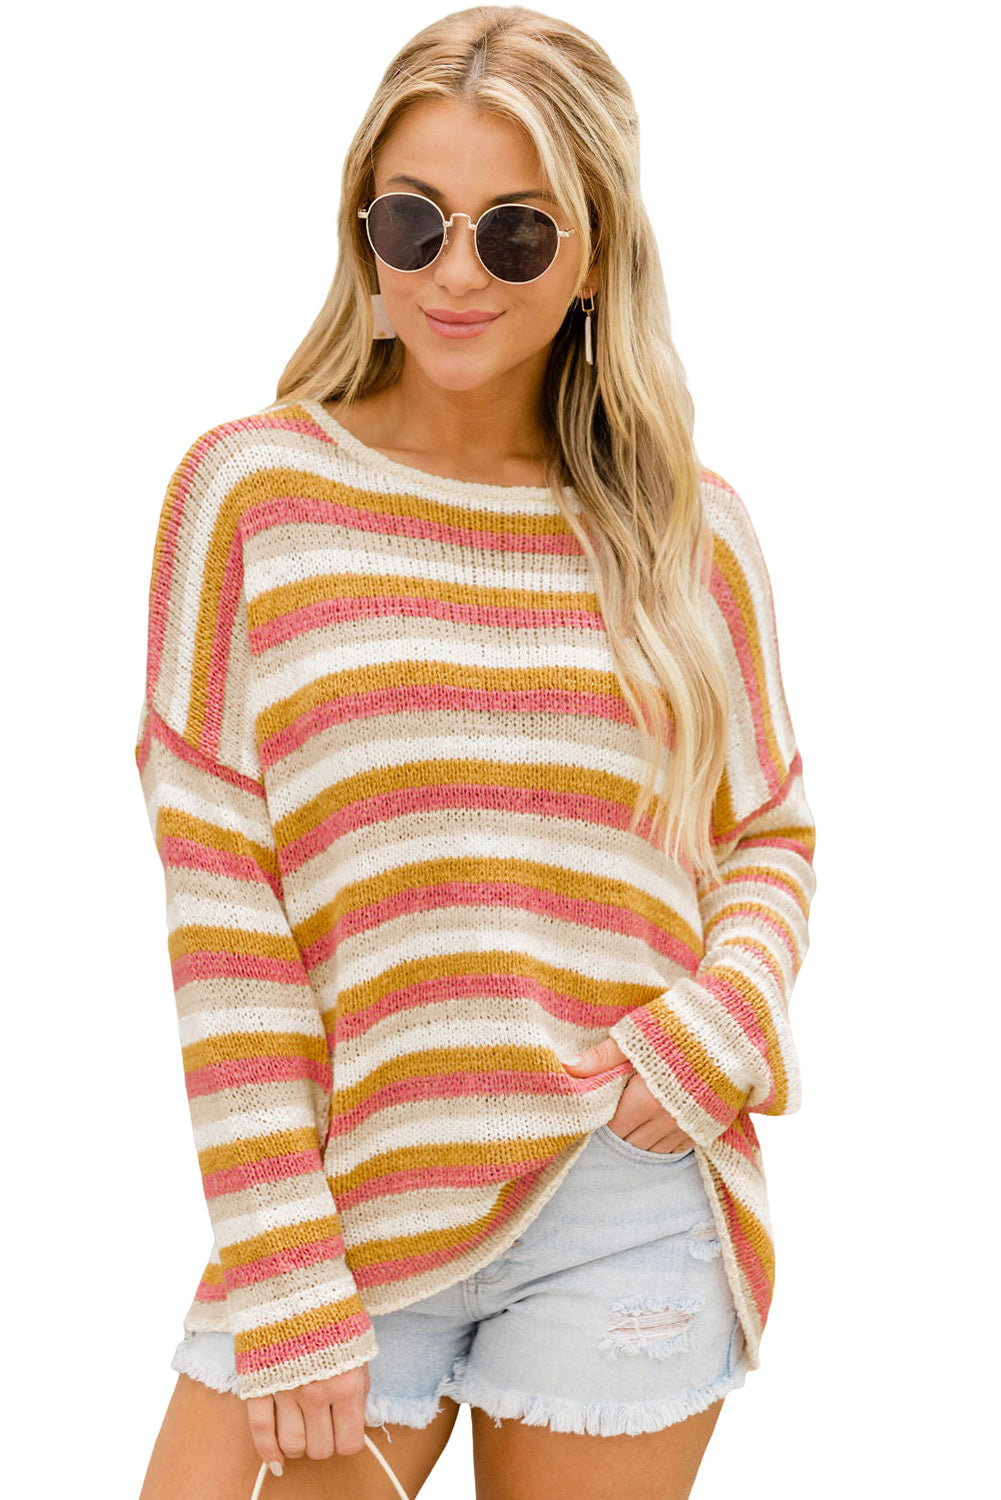 LC2723032-14-S, LC2723032-14-M, LC2723032-14-L, LC2723032-14-XL, Orange Stripe Long Sleeve Knitted Sweater 